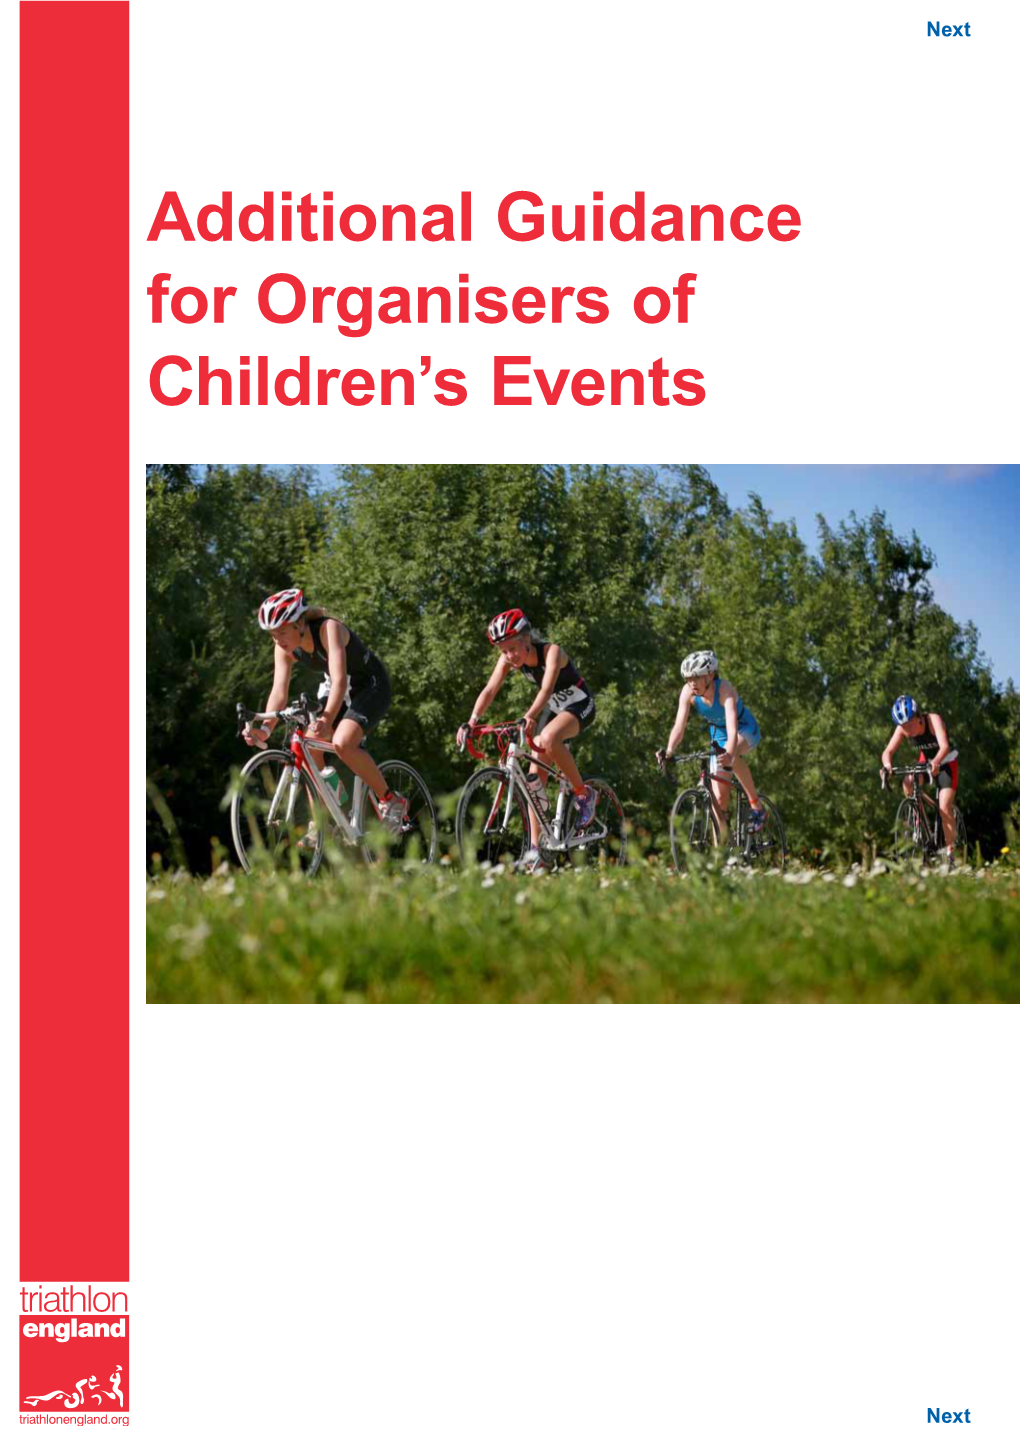 Additional Guidance for Organisers of Children's Events